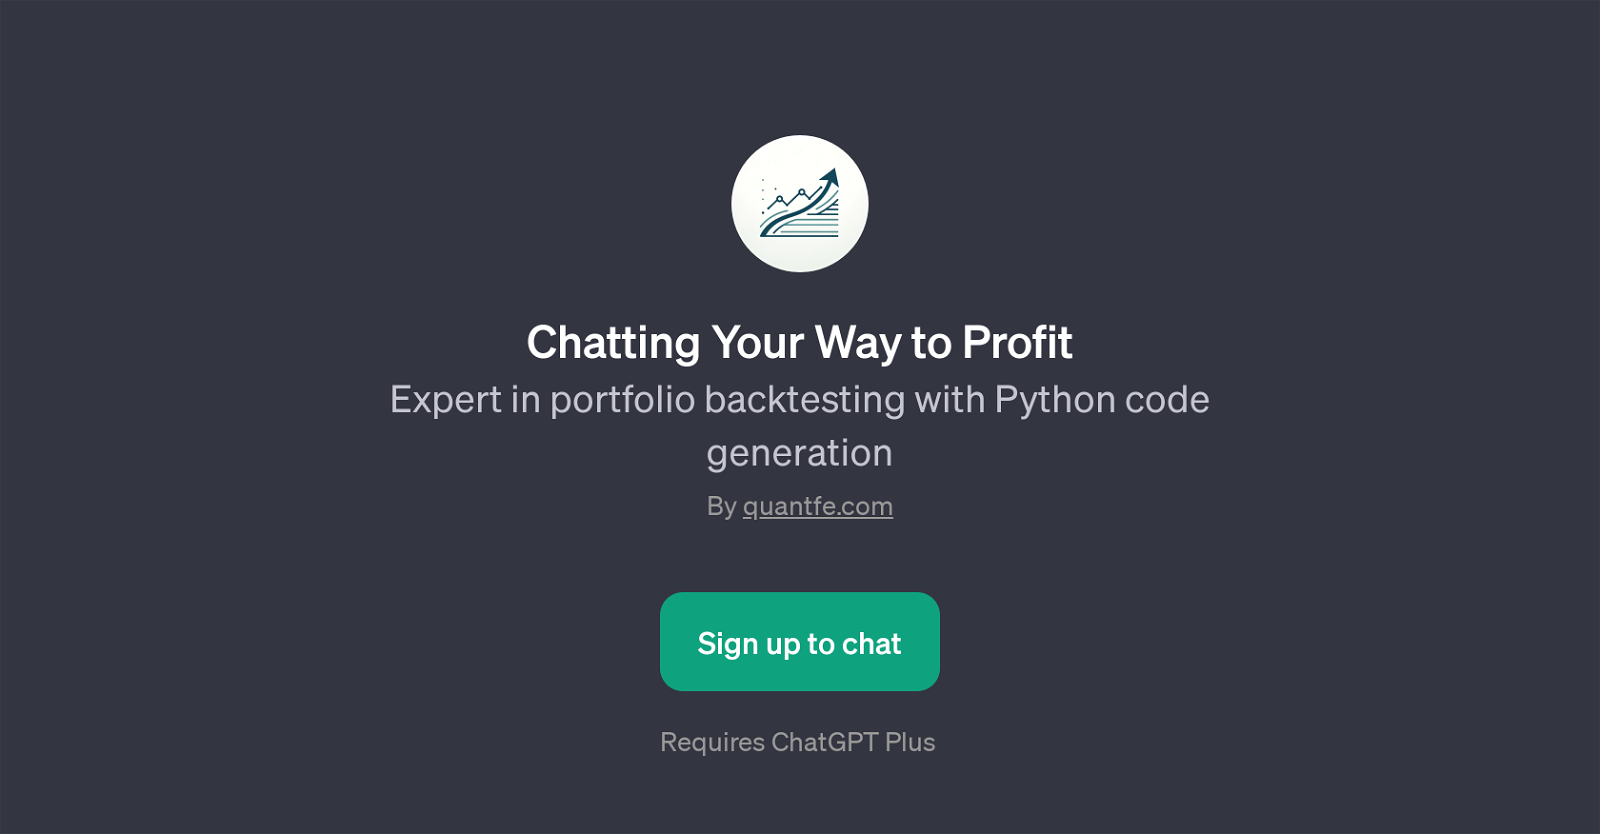 Chatting Your Way to Profit website